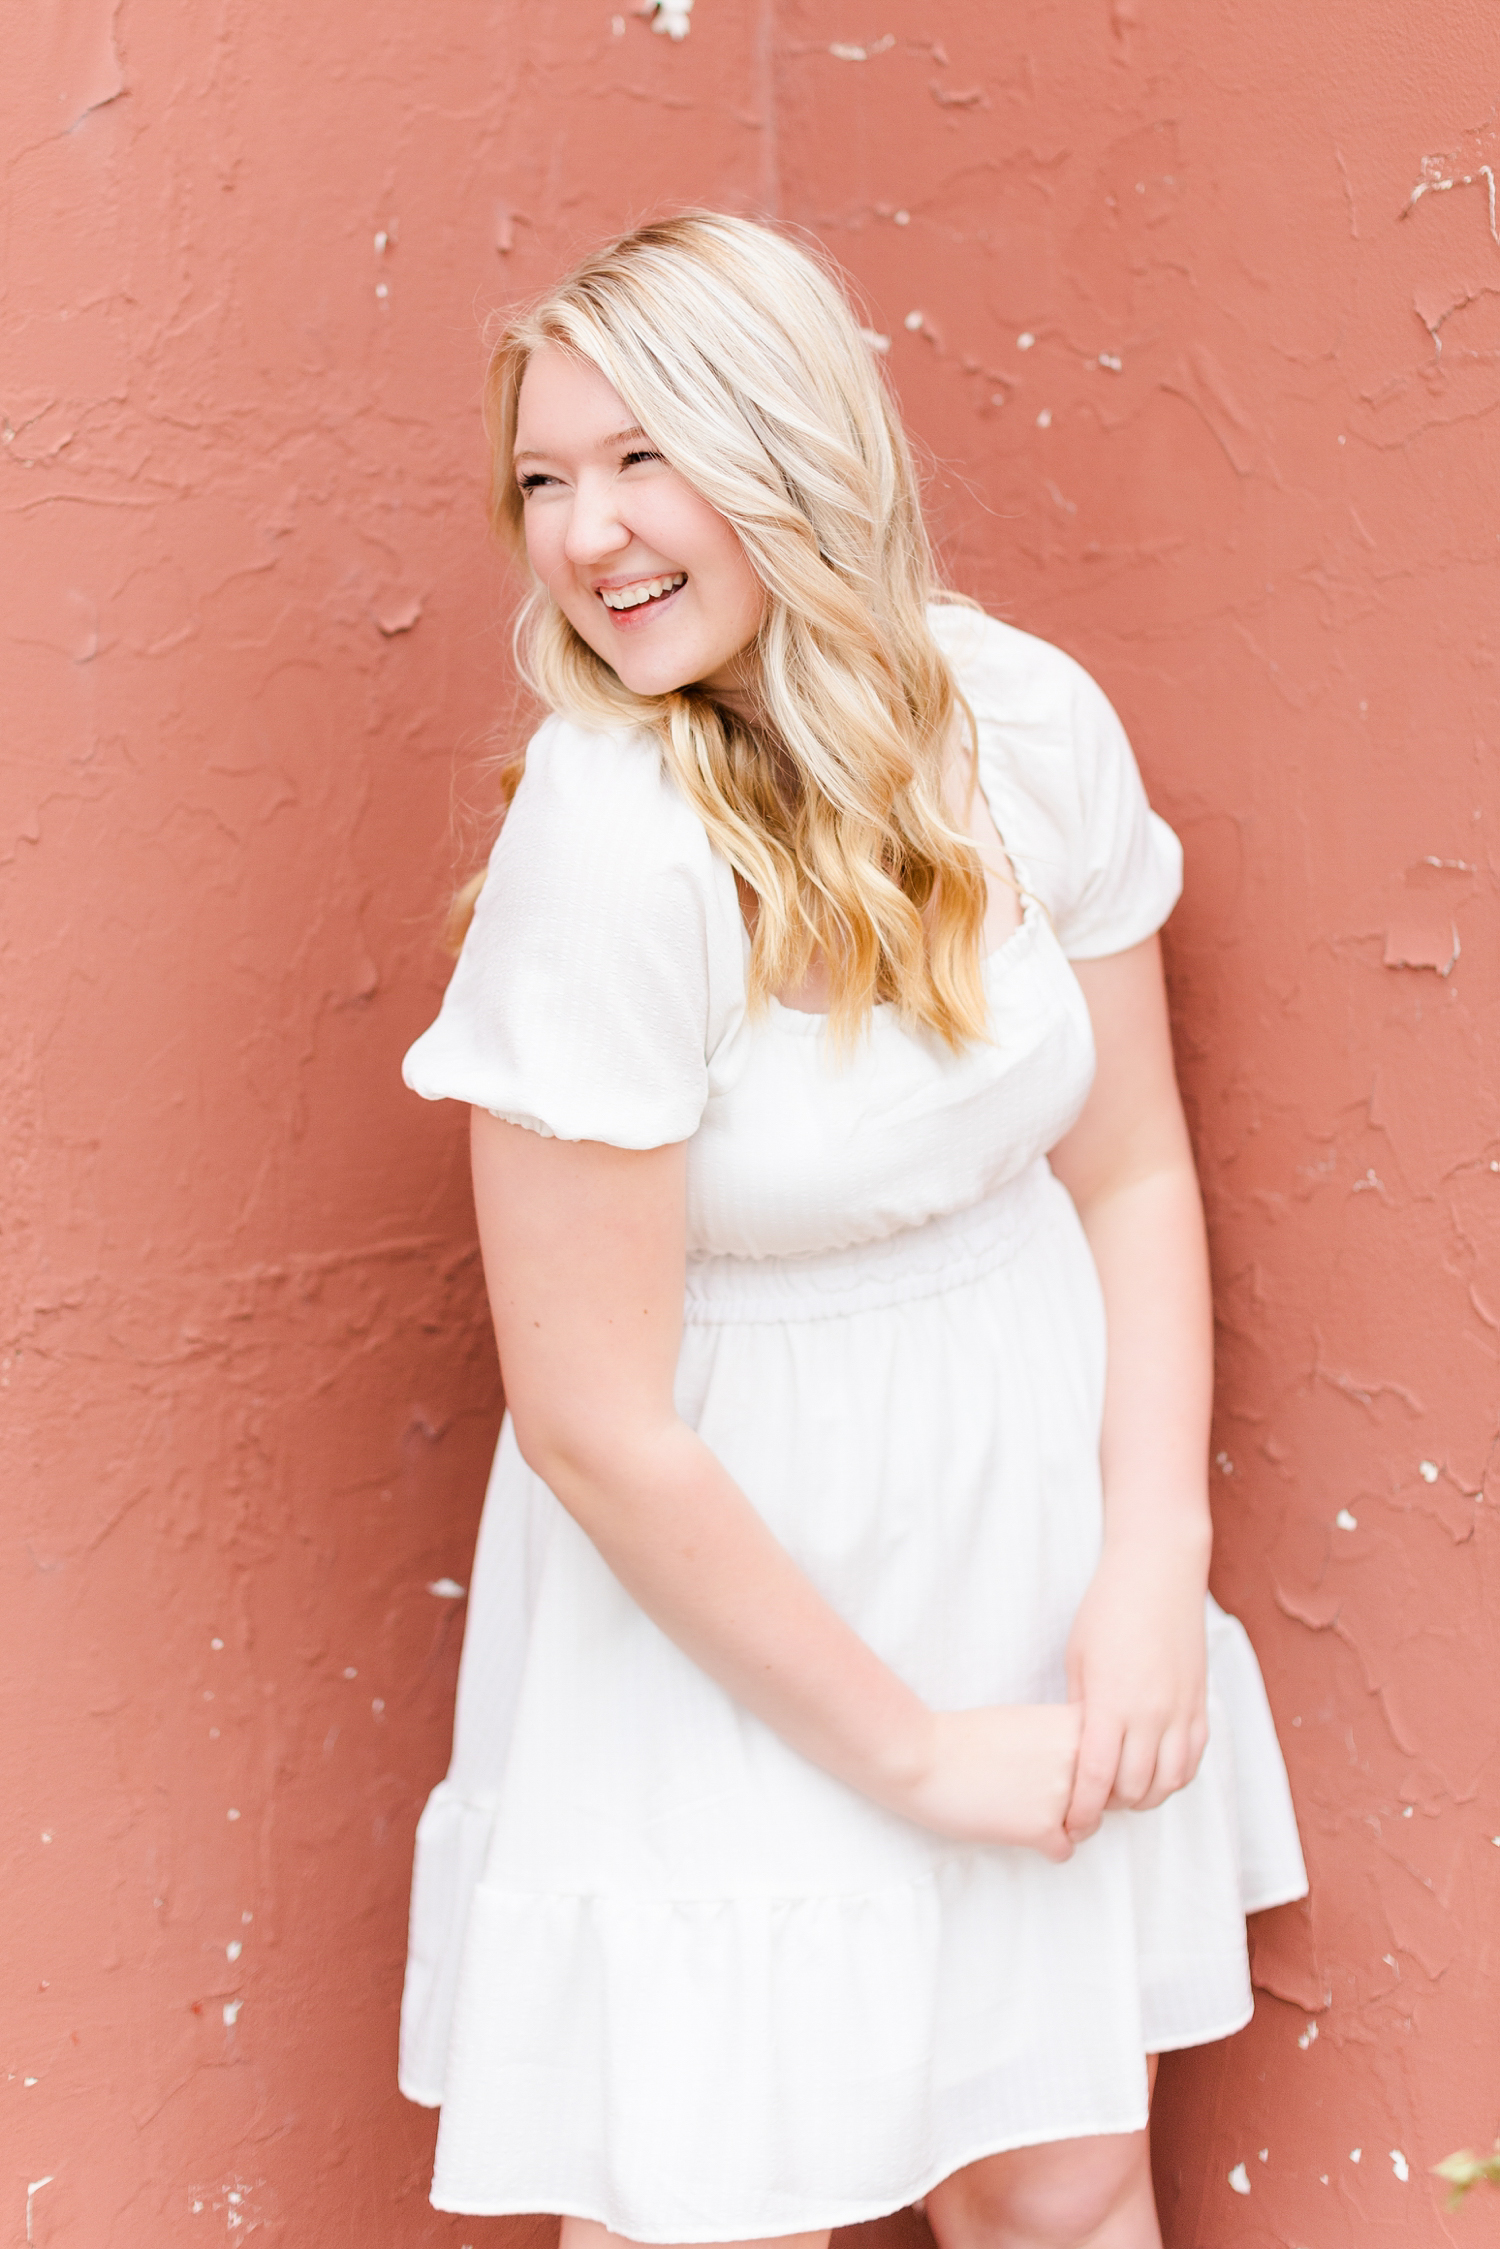 Jayden, wearing a white dress, laughs over her shoulder has she stands in front of a pink wall in downtown Algona, IA | CB Studio